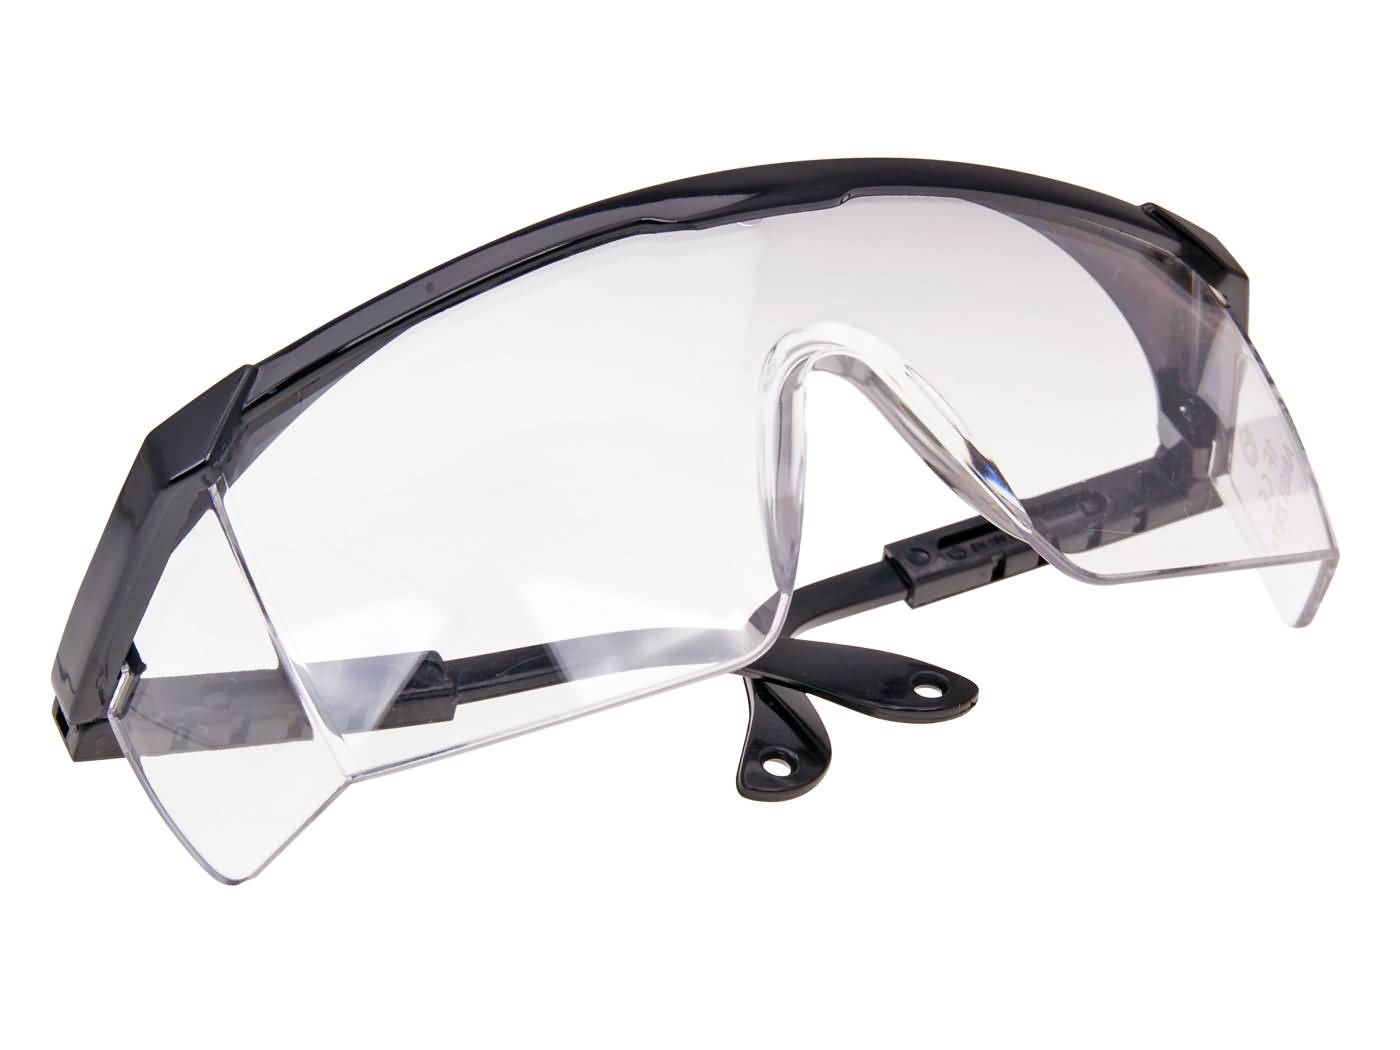 Safety glasses with clear glass